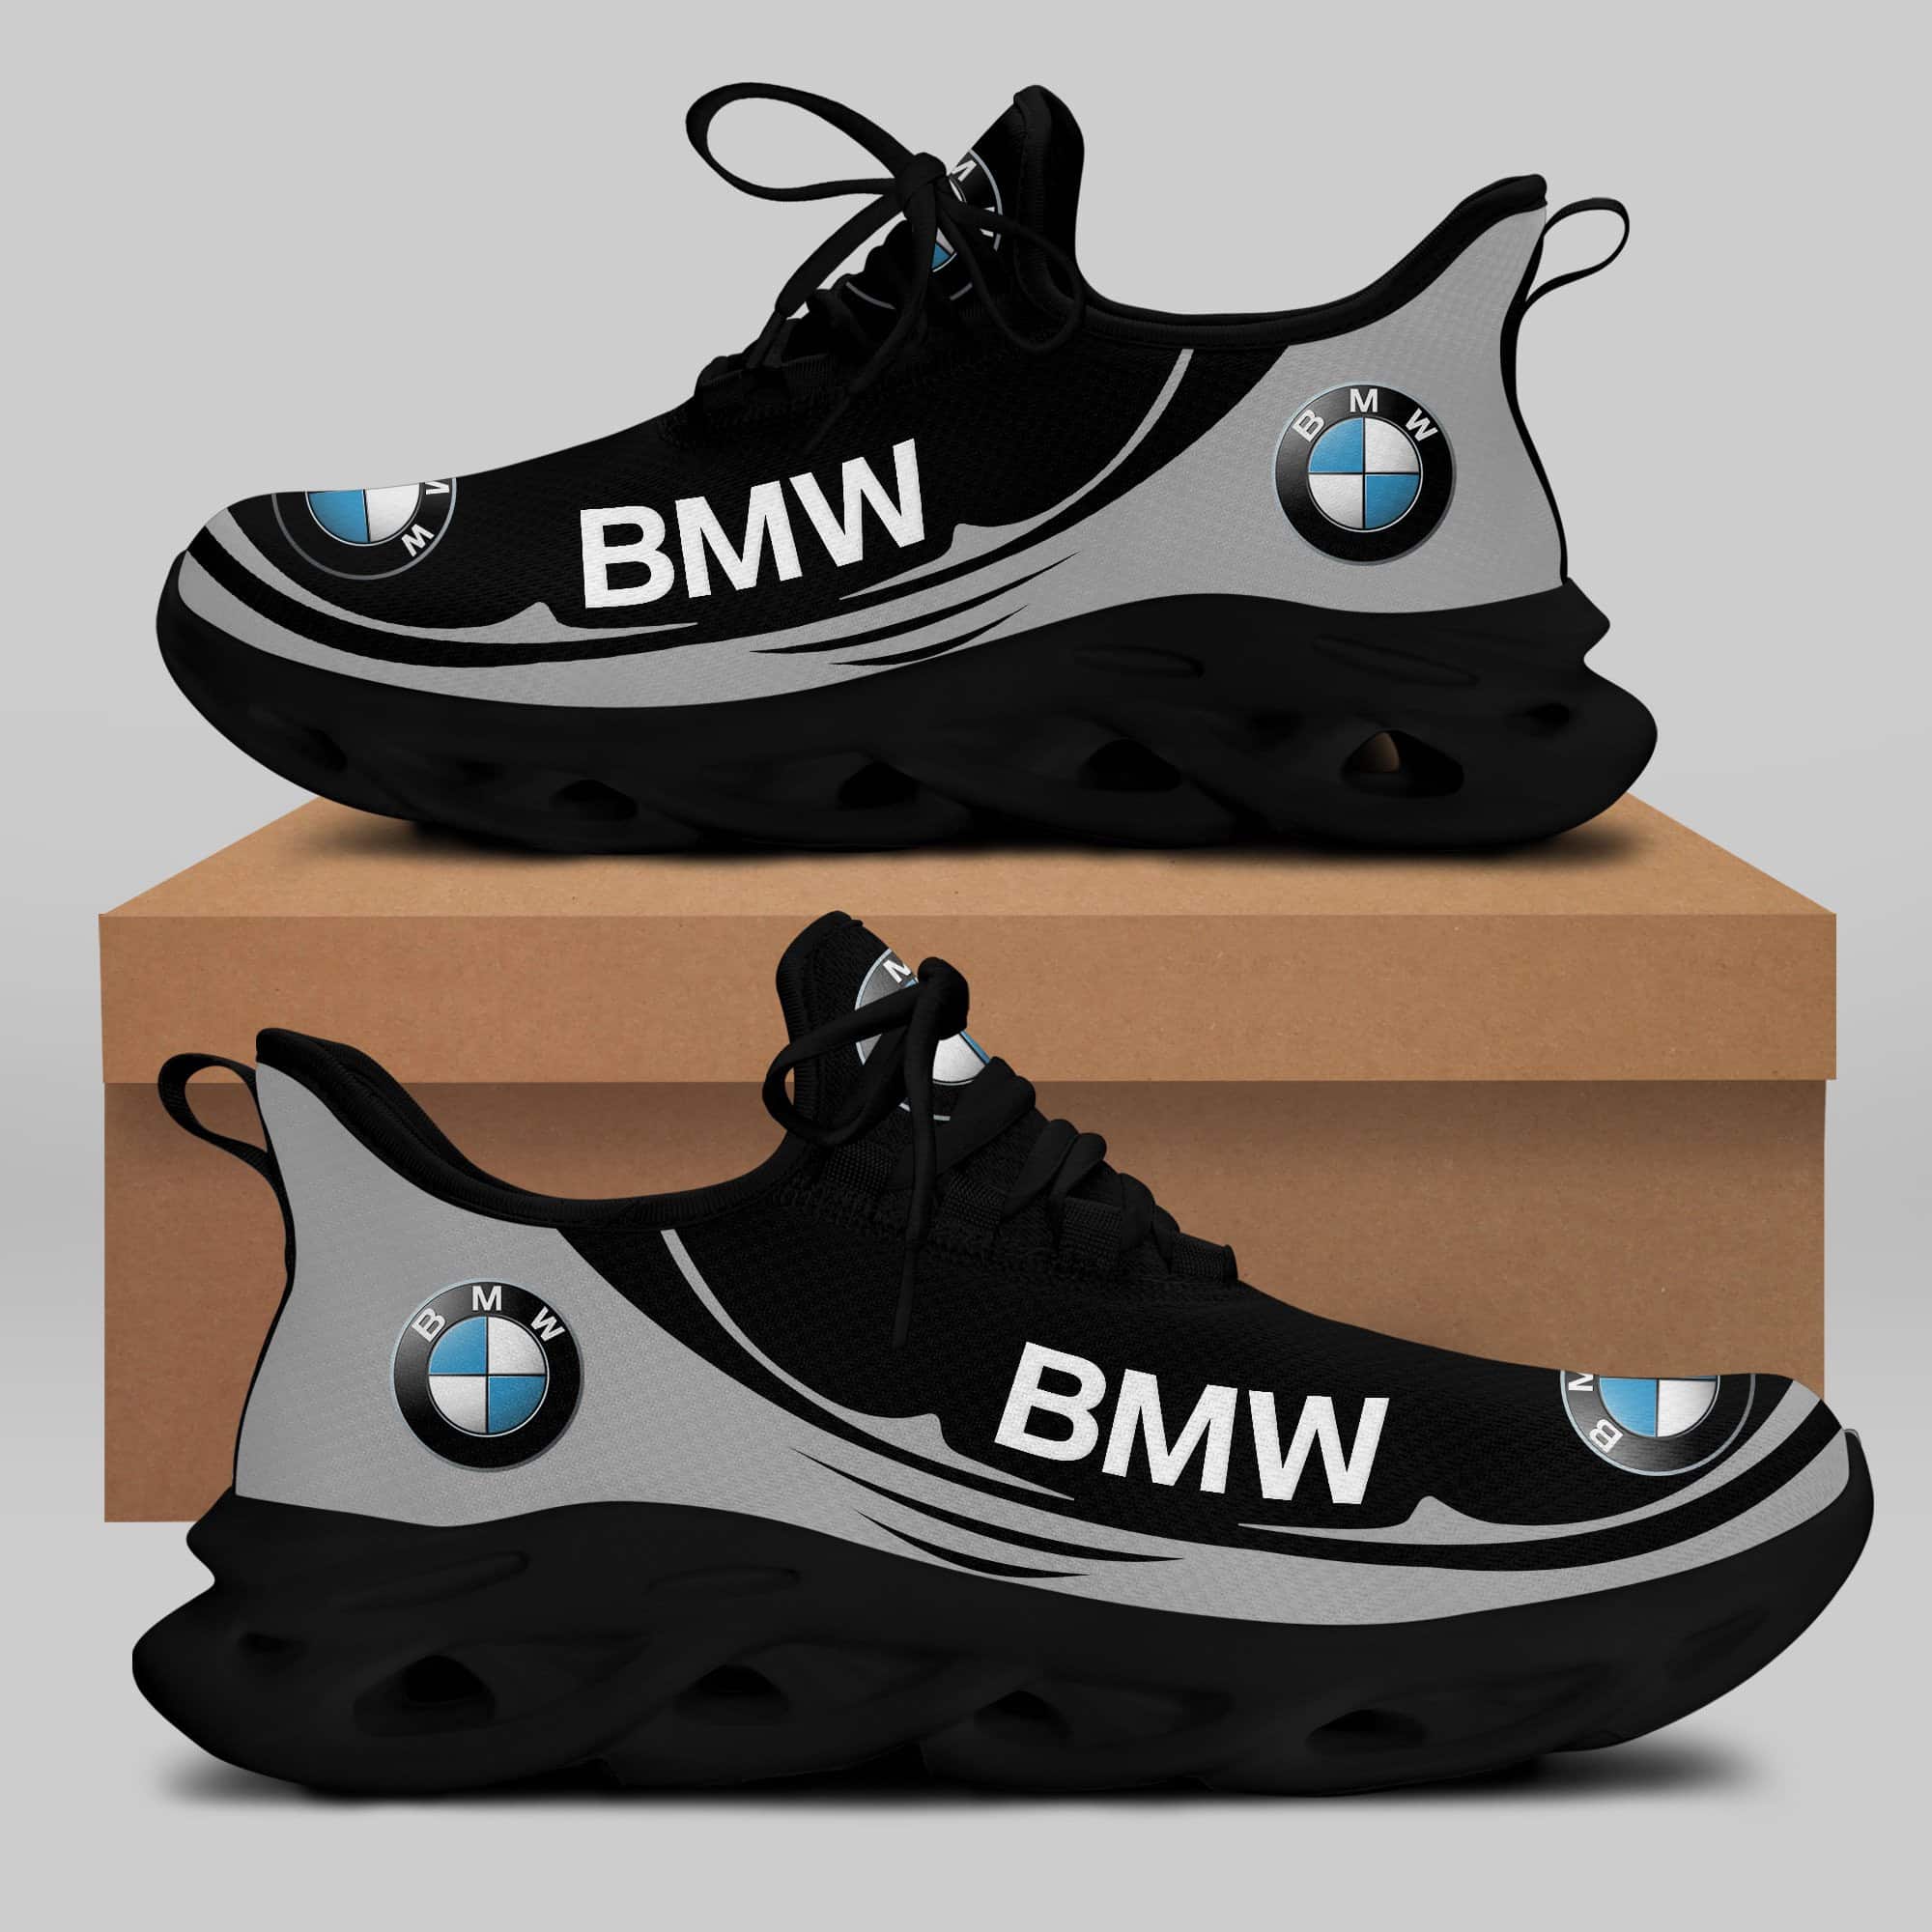 Bmw Running Shoes Max Soul Shoes Sneakers Ver 31 2